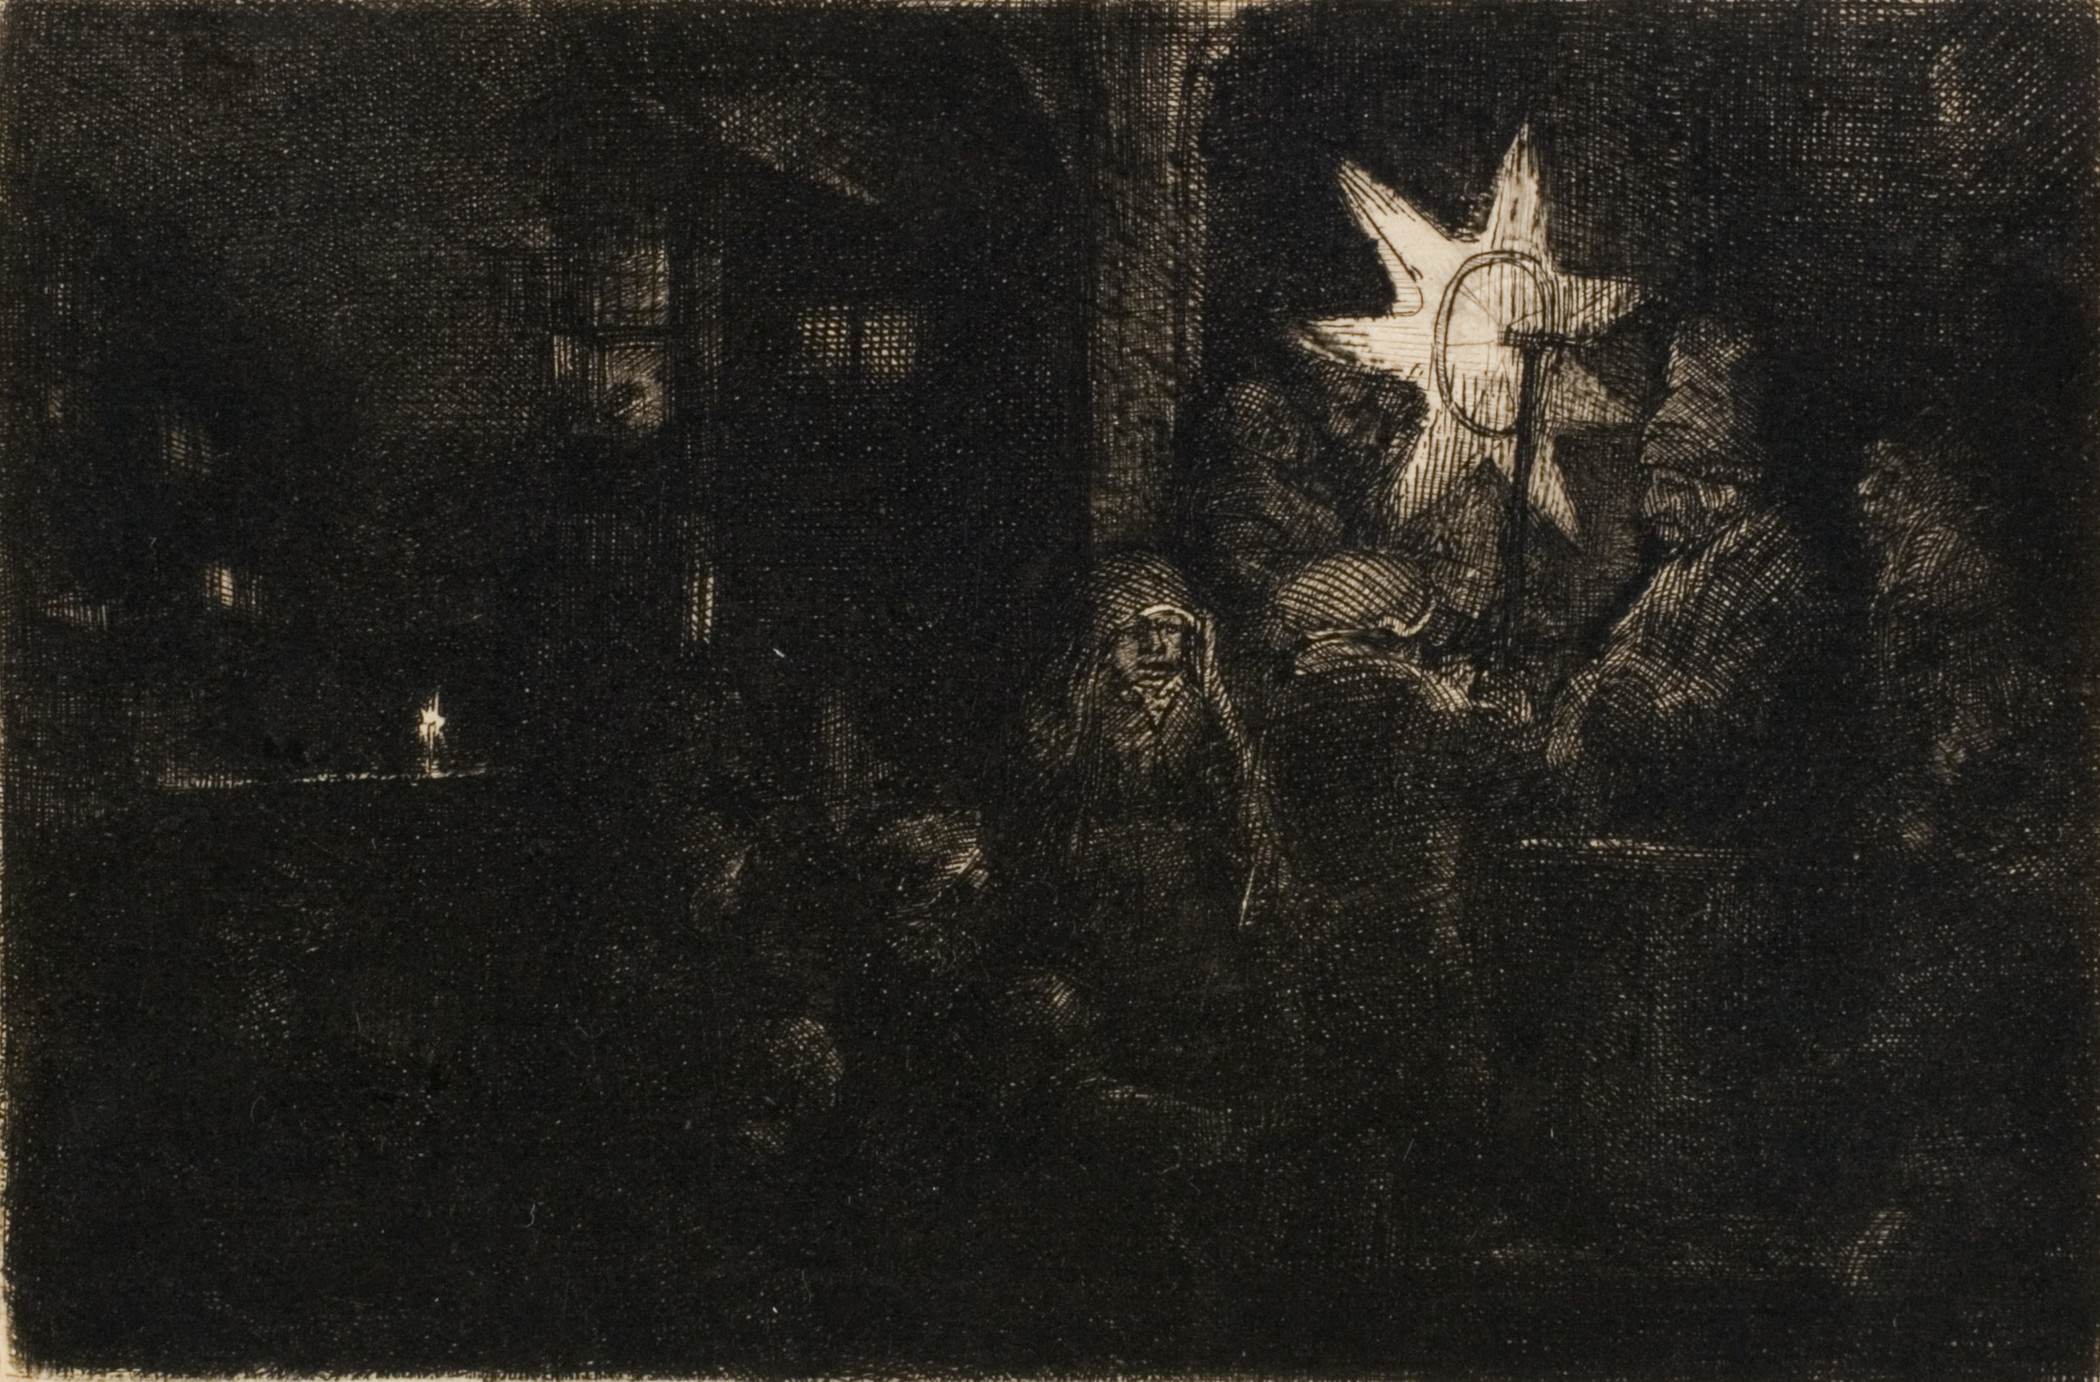 Rembrandt Harmensz. van Rijn, The Star of Kings: A Night Piece, c. 1651, Los Angeles County Museum of Art, gift of Michael Forman in honor of the museum's 40th anniversary, photo © Museum Associates/LACMA